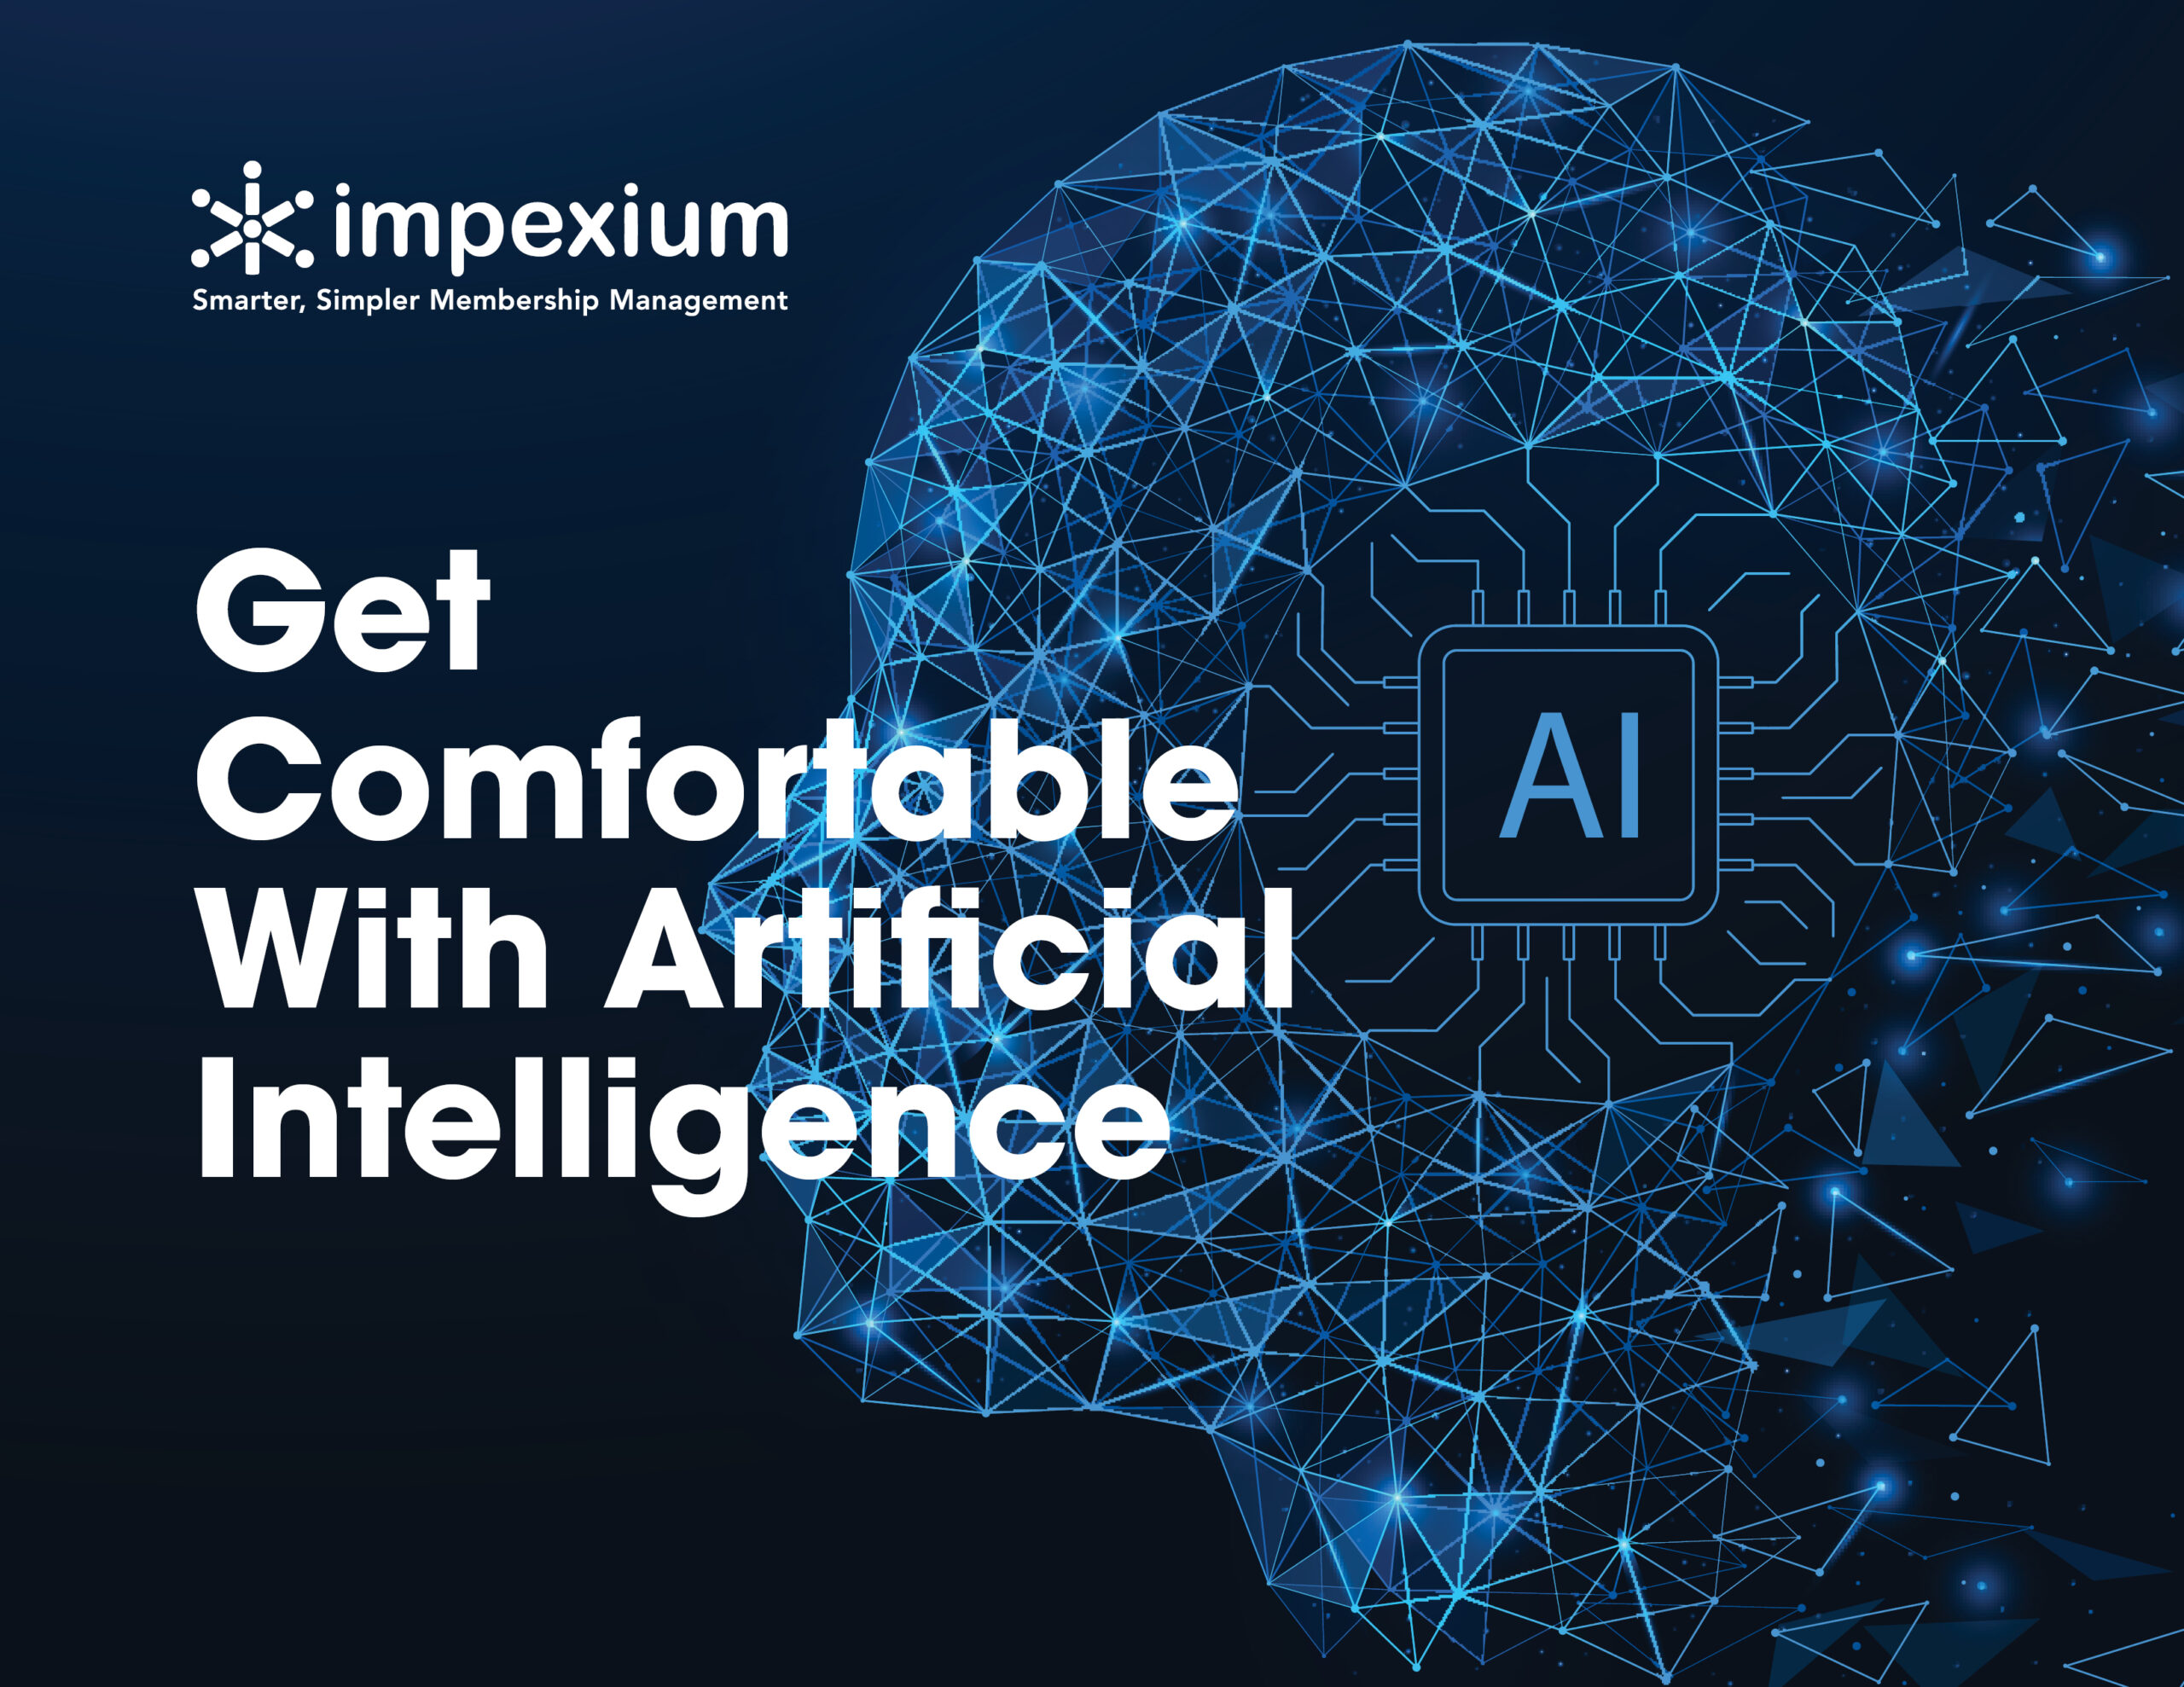 How to Get Comfortable with Artificial Intelligence